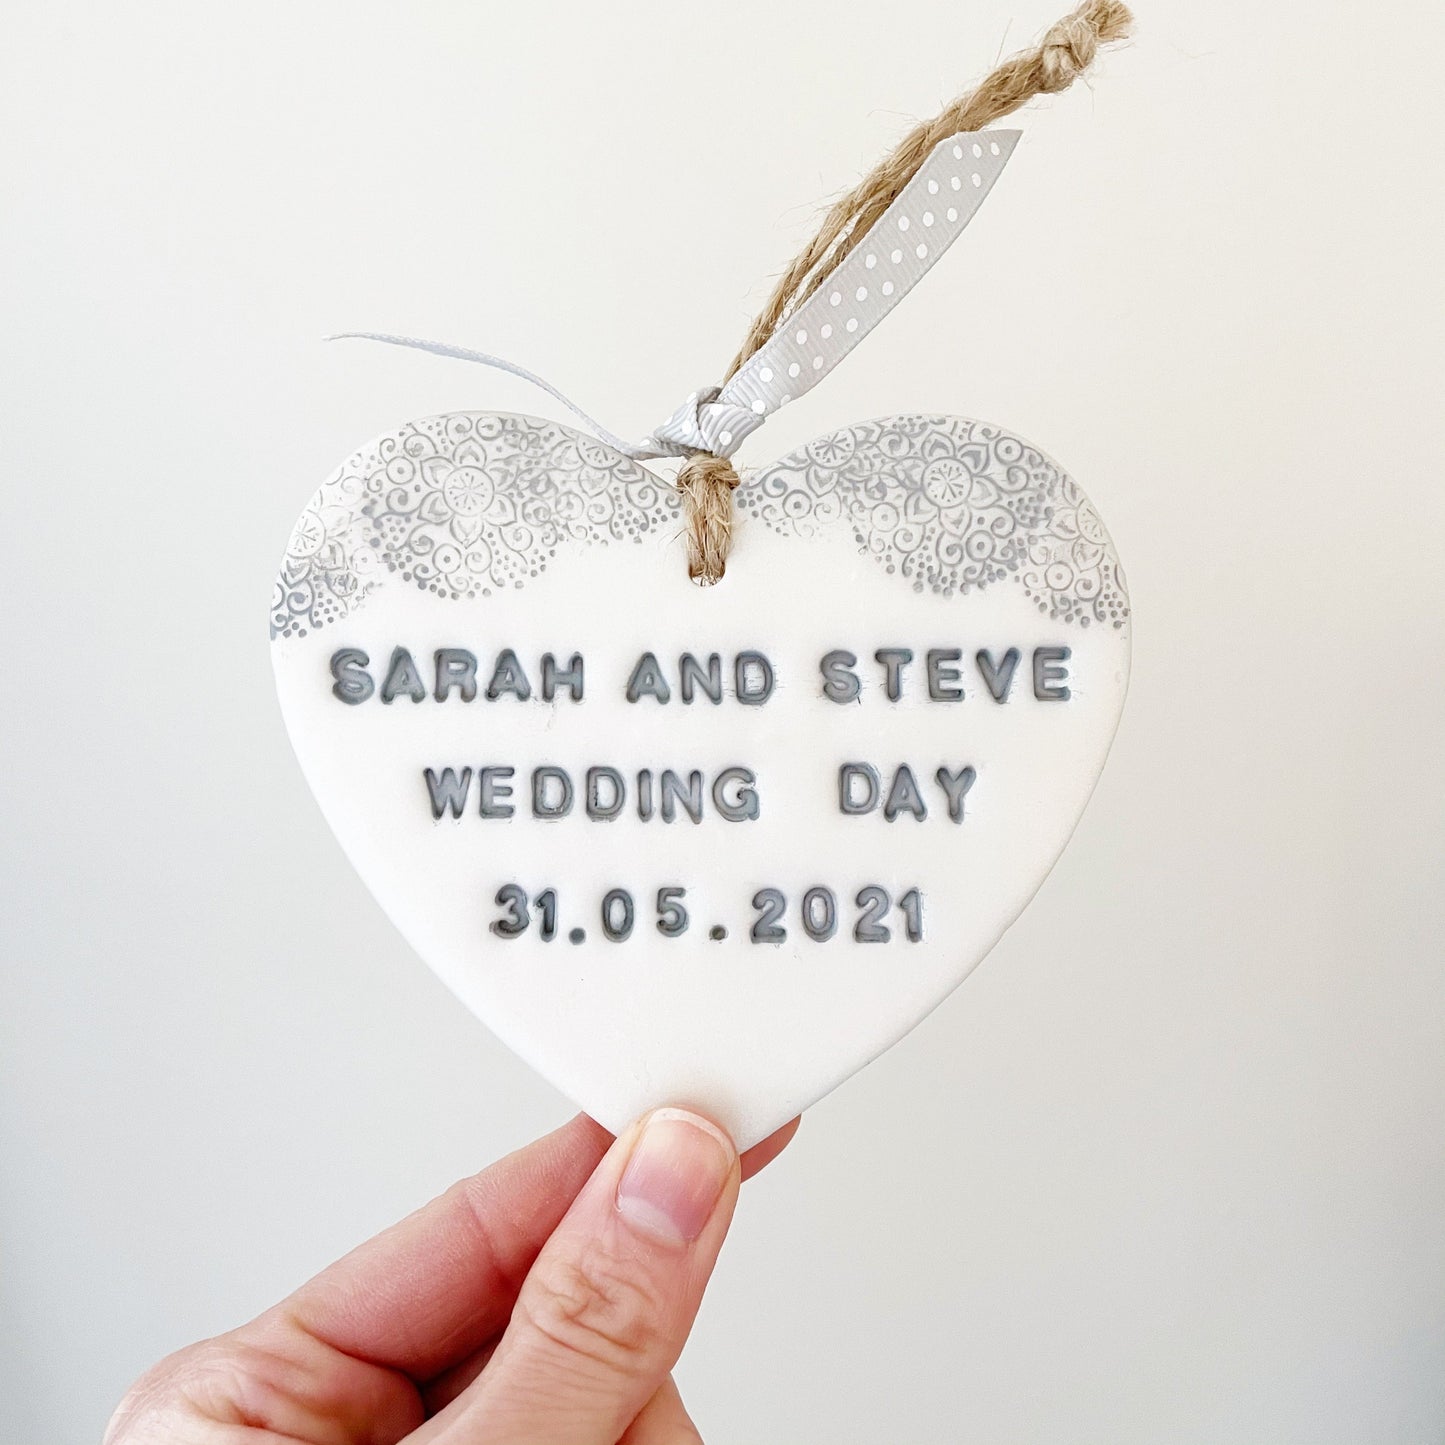 Personalised wedding day gift, pearlised white clay hanging heart with a grey lace edge at the top of the heart, the heart is personalised with SARAH AND STEVE WEDDING DAY 31.05.2021